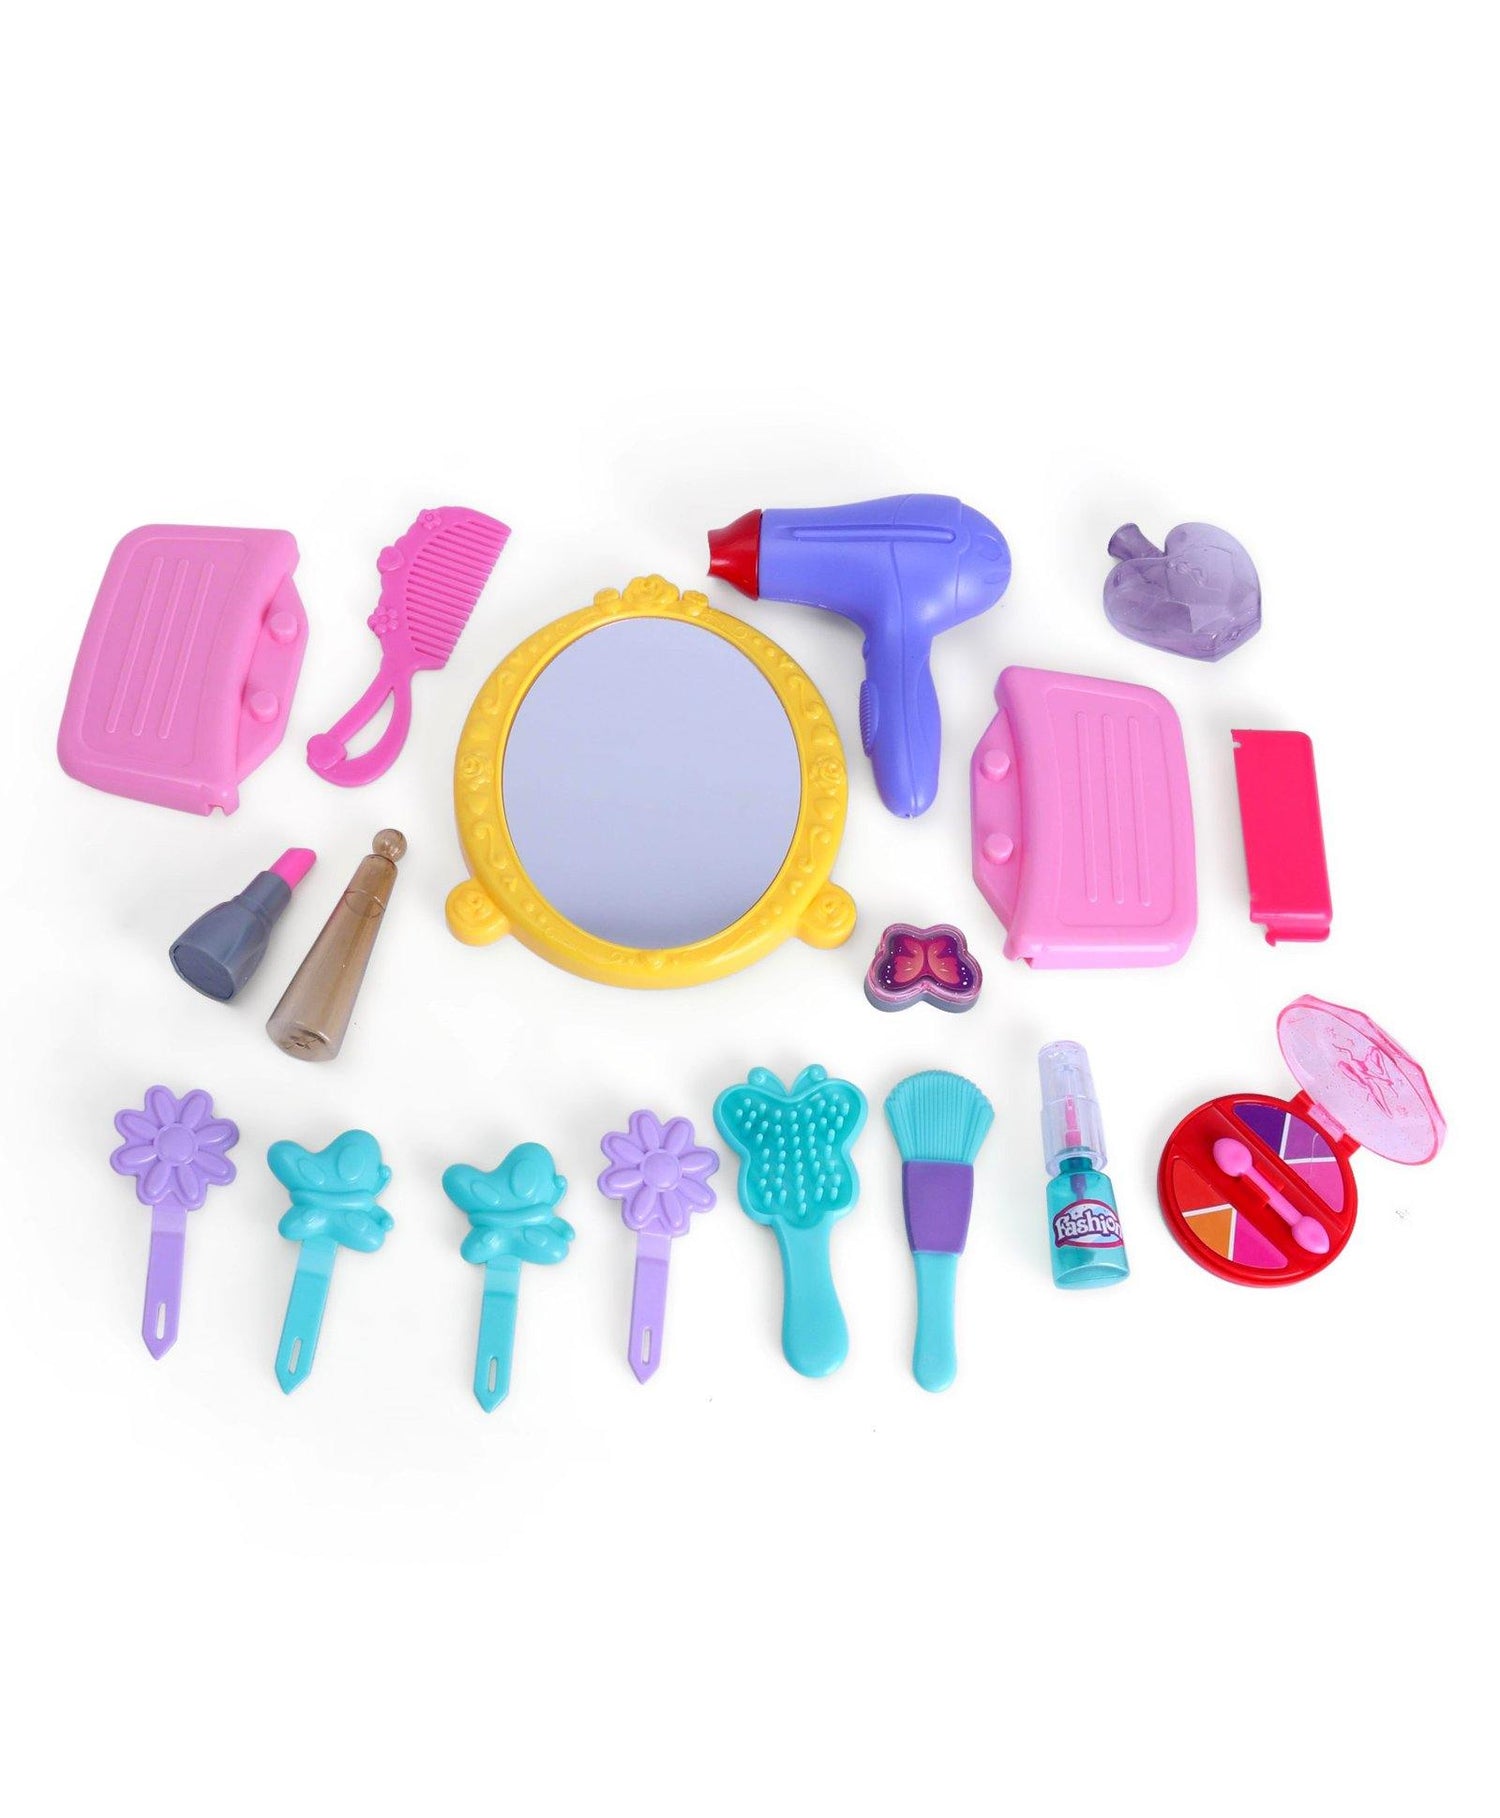 Buy samstoy Fashion Beauty Set 21 Pieces for girl- Pink bag - sams toy world shops in Ahmedabad - call on 9664998614 - best kids stores in Gujarat - Near me - discounted prices